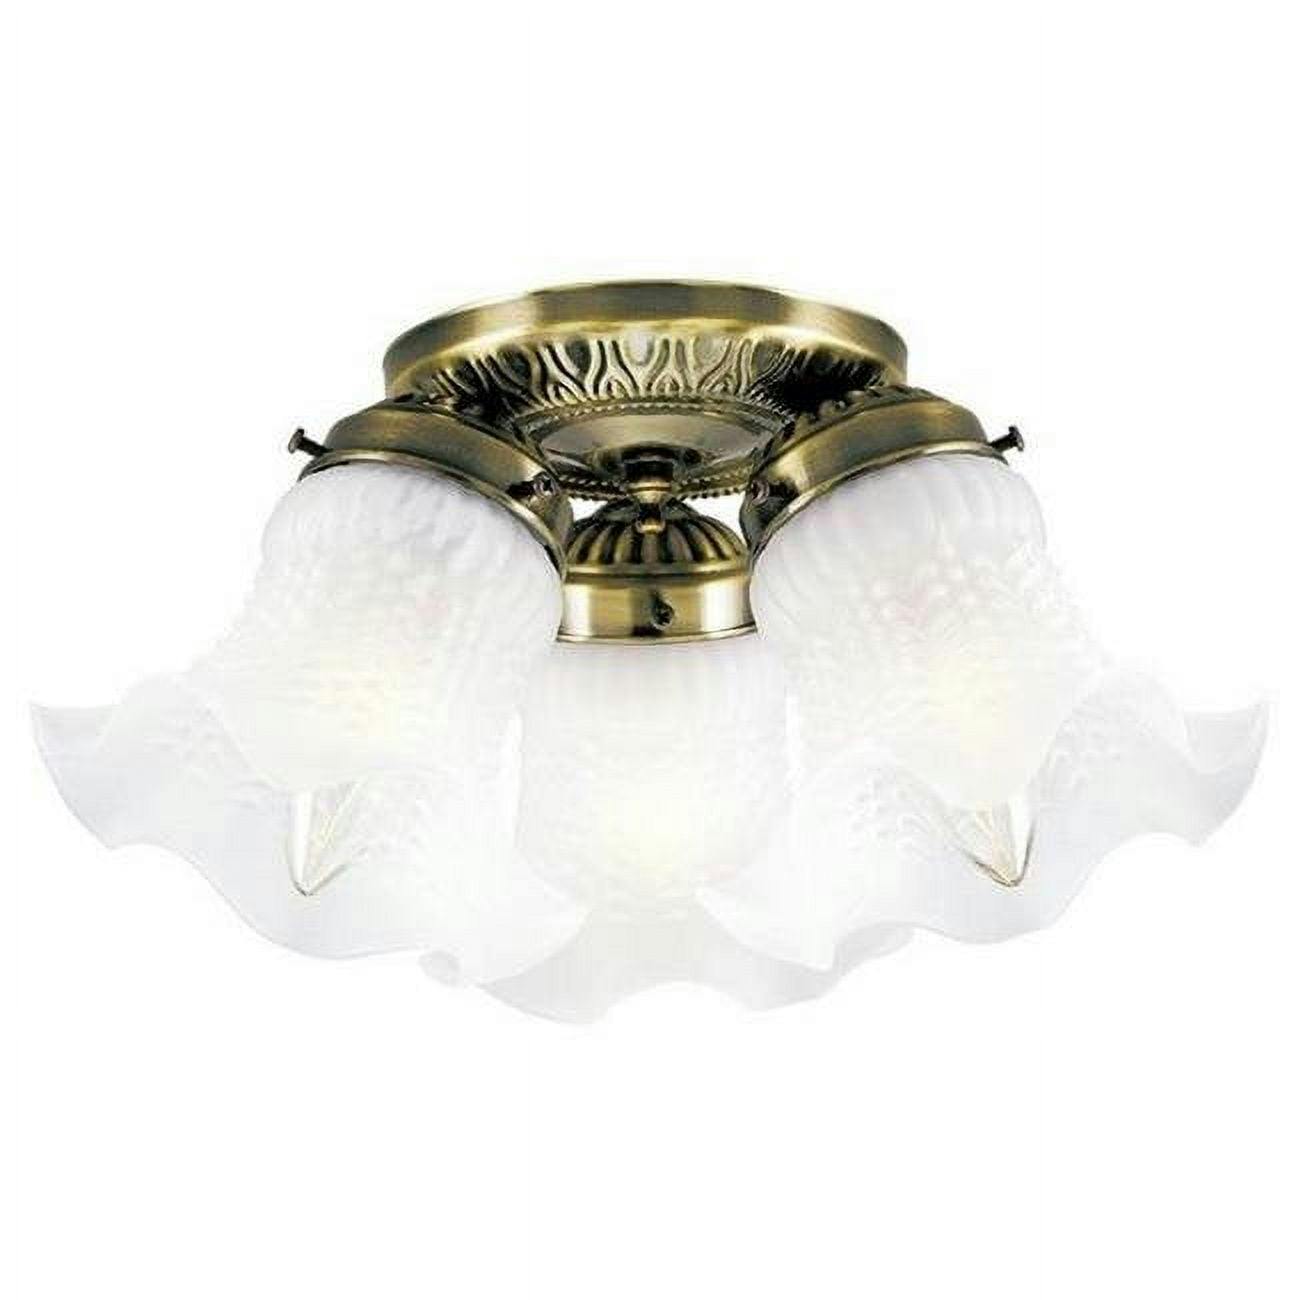 Antique Brass Circular Flush Mount Ceiling Light with Frosted Glass